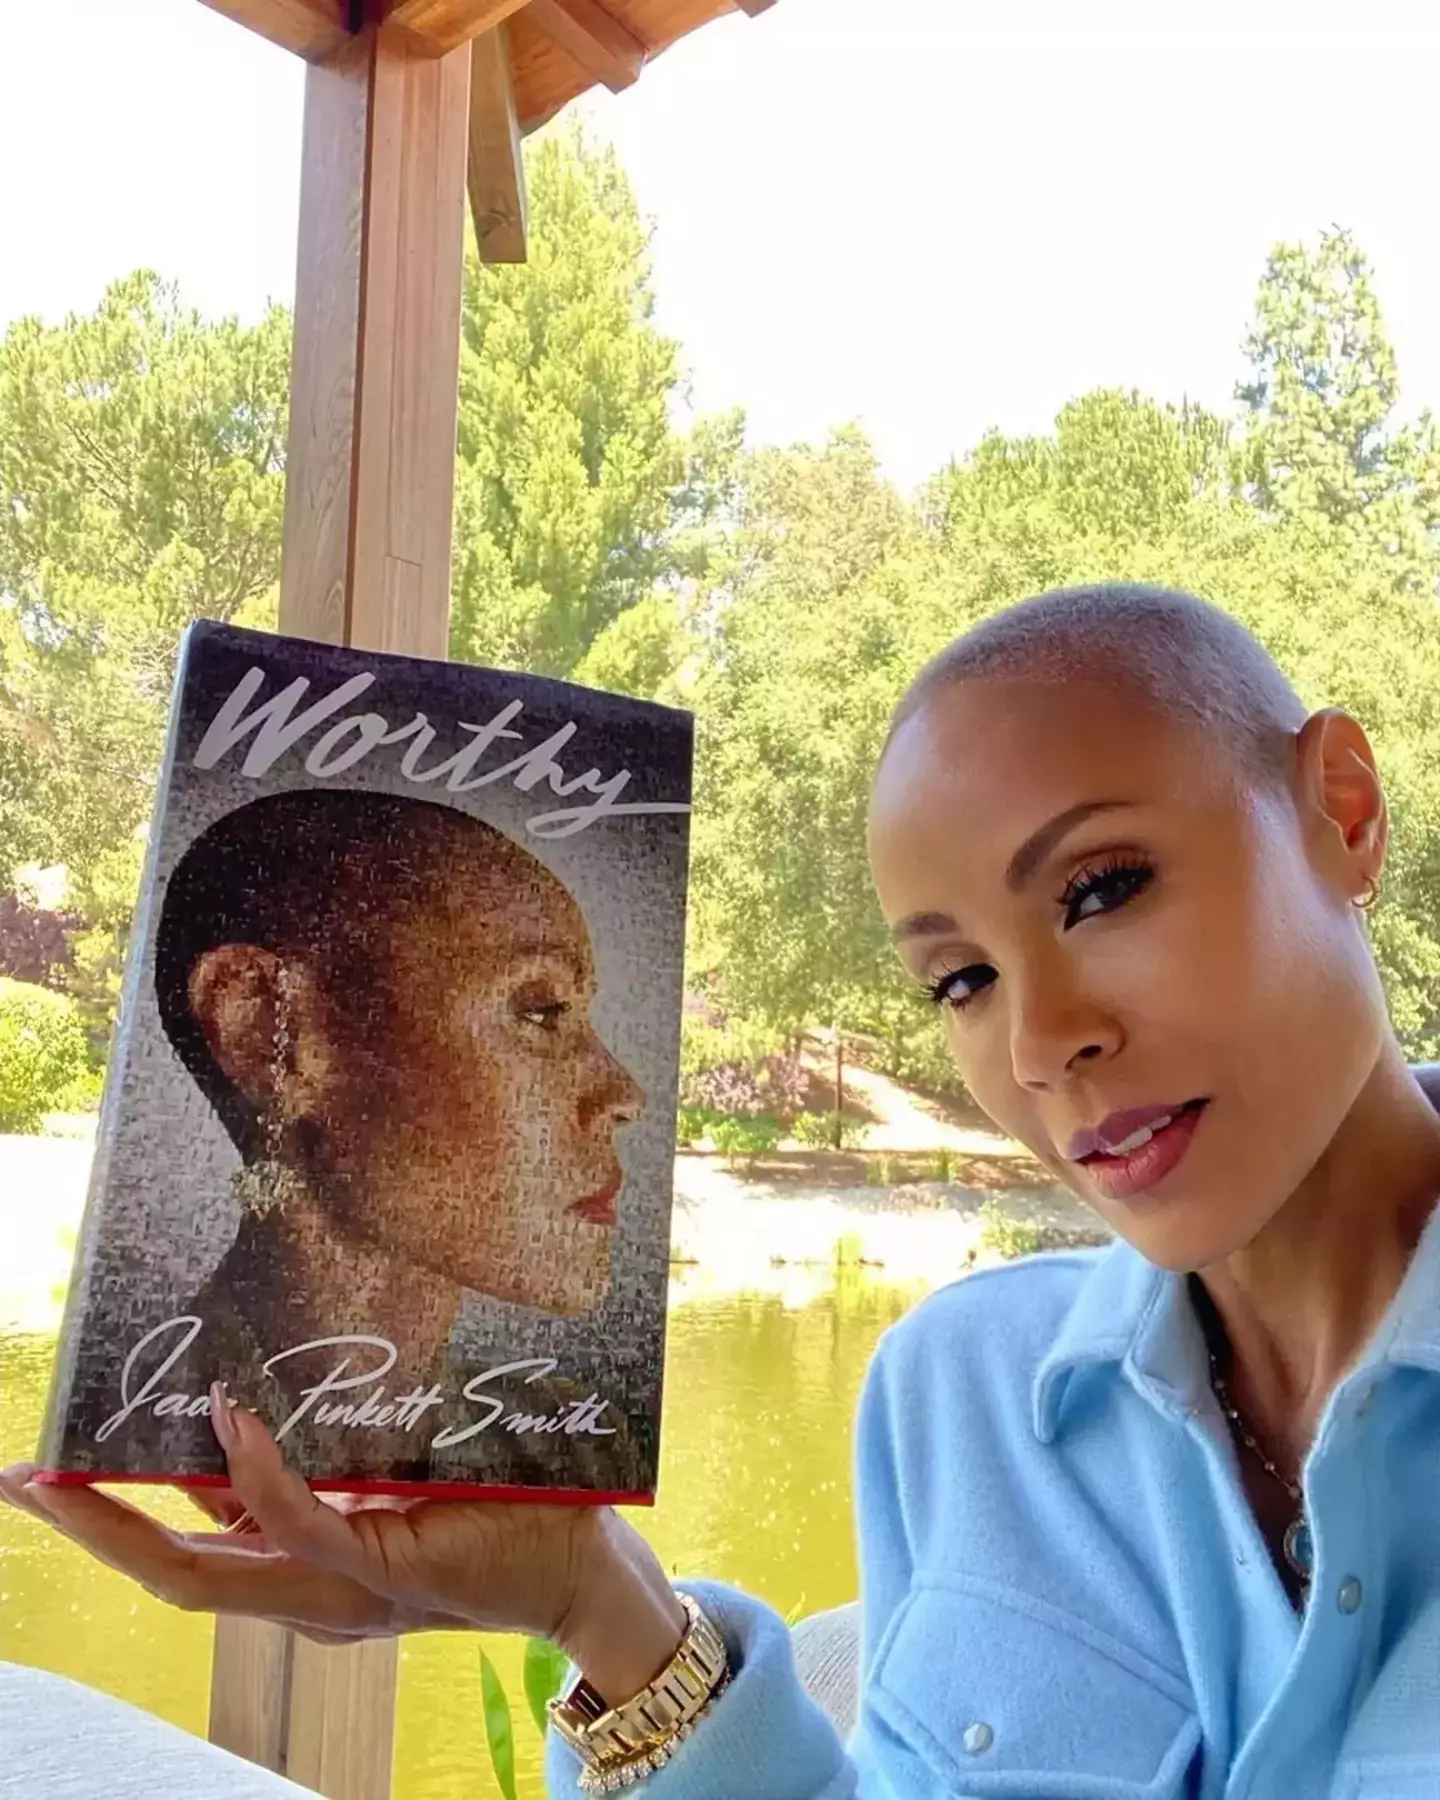 Jada Pinkett Smith has a new autobiography out.